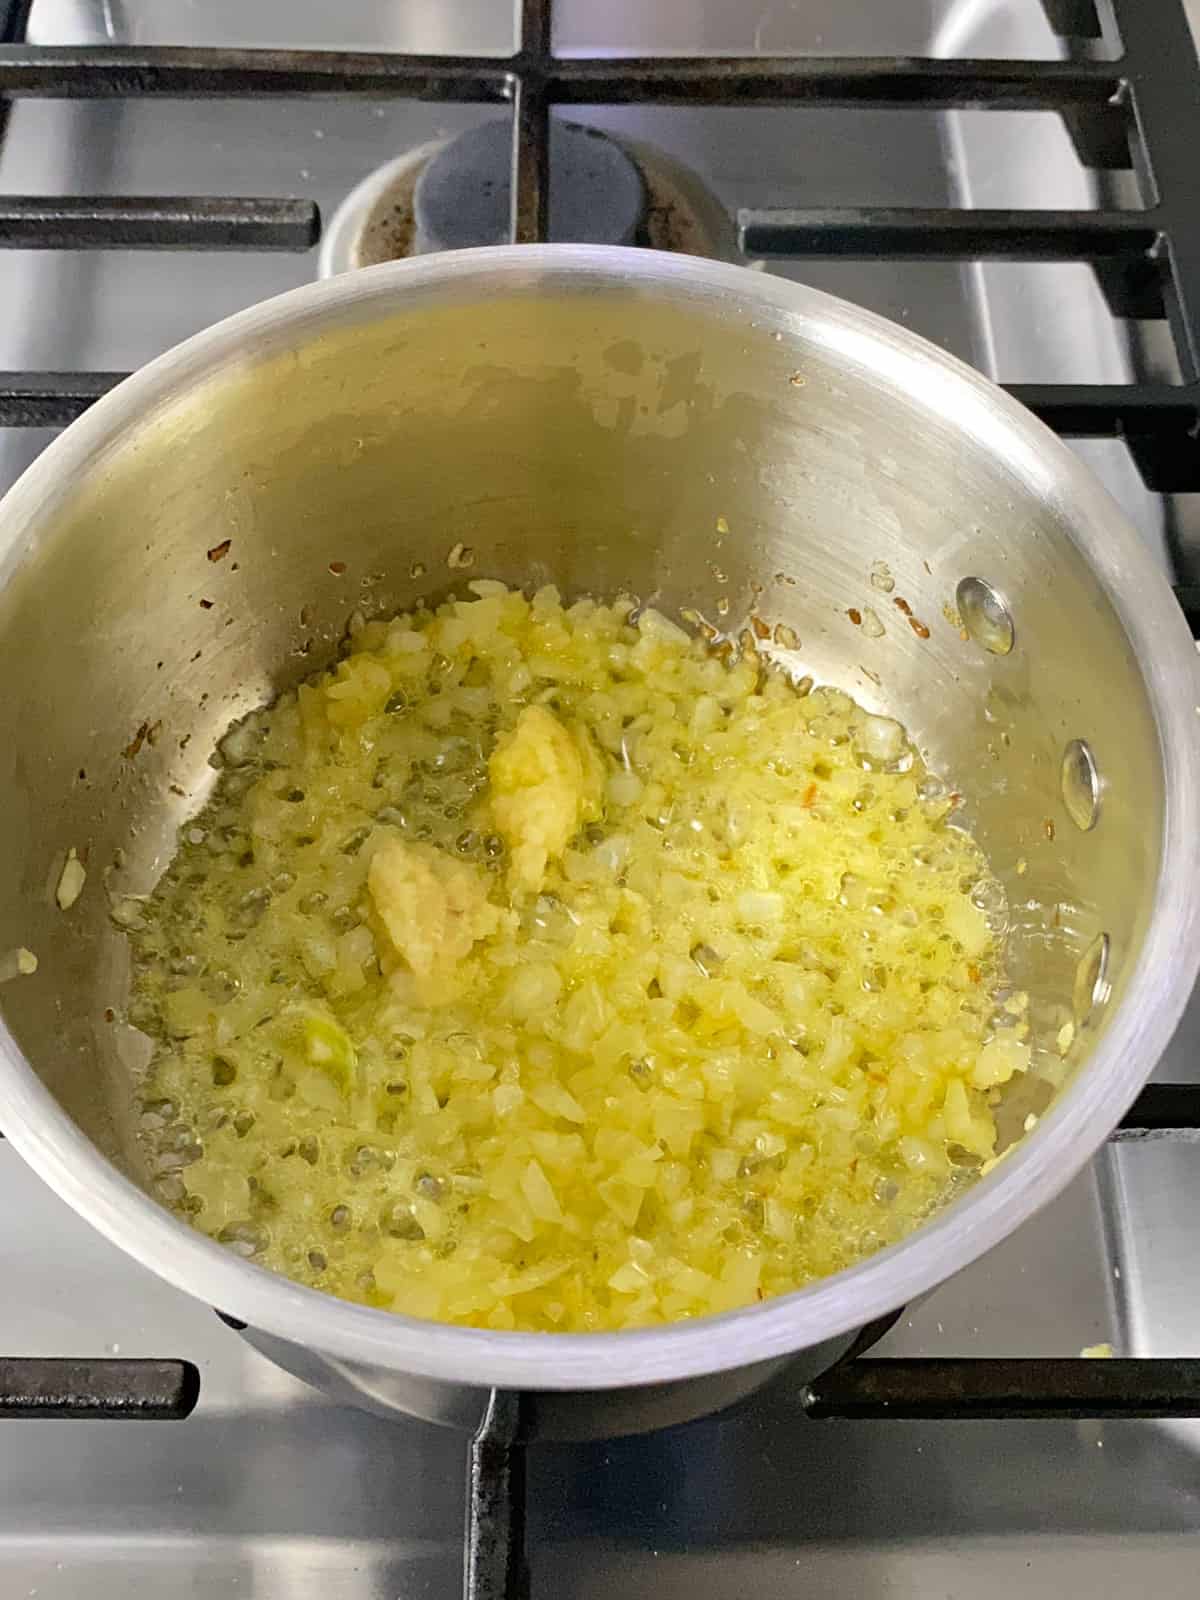 Saute chopped onion and garlic in olive oil until onion is softened and fragrant.